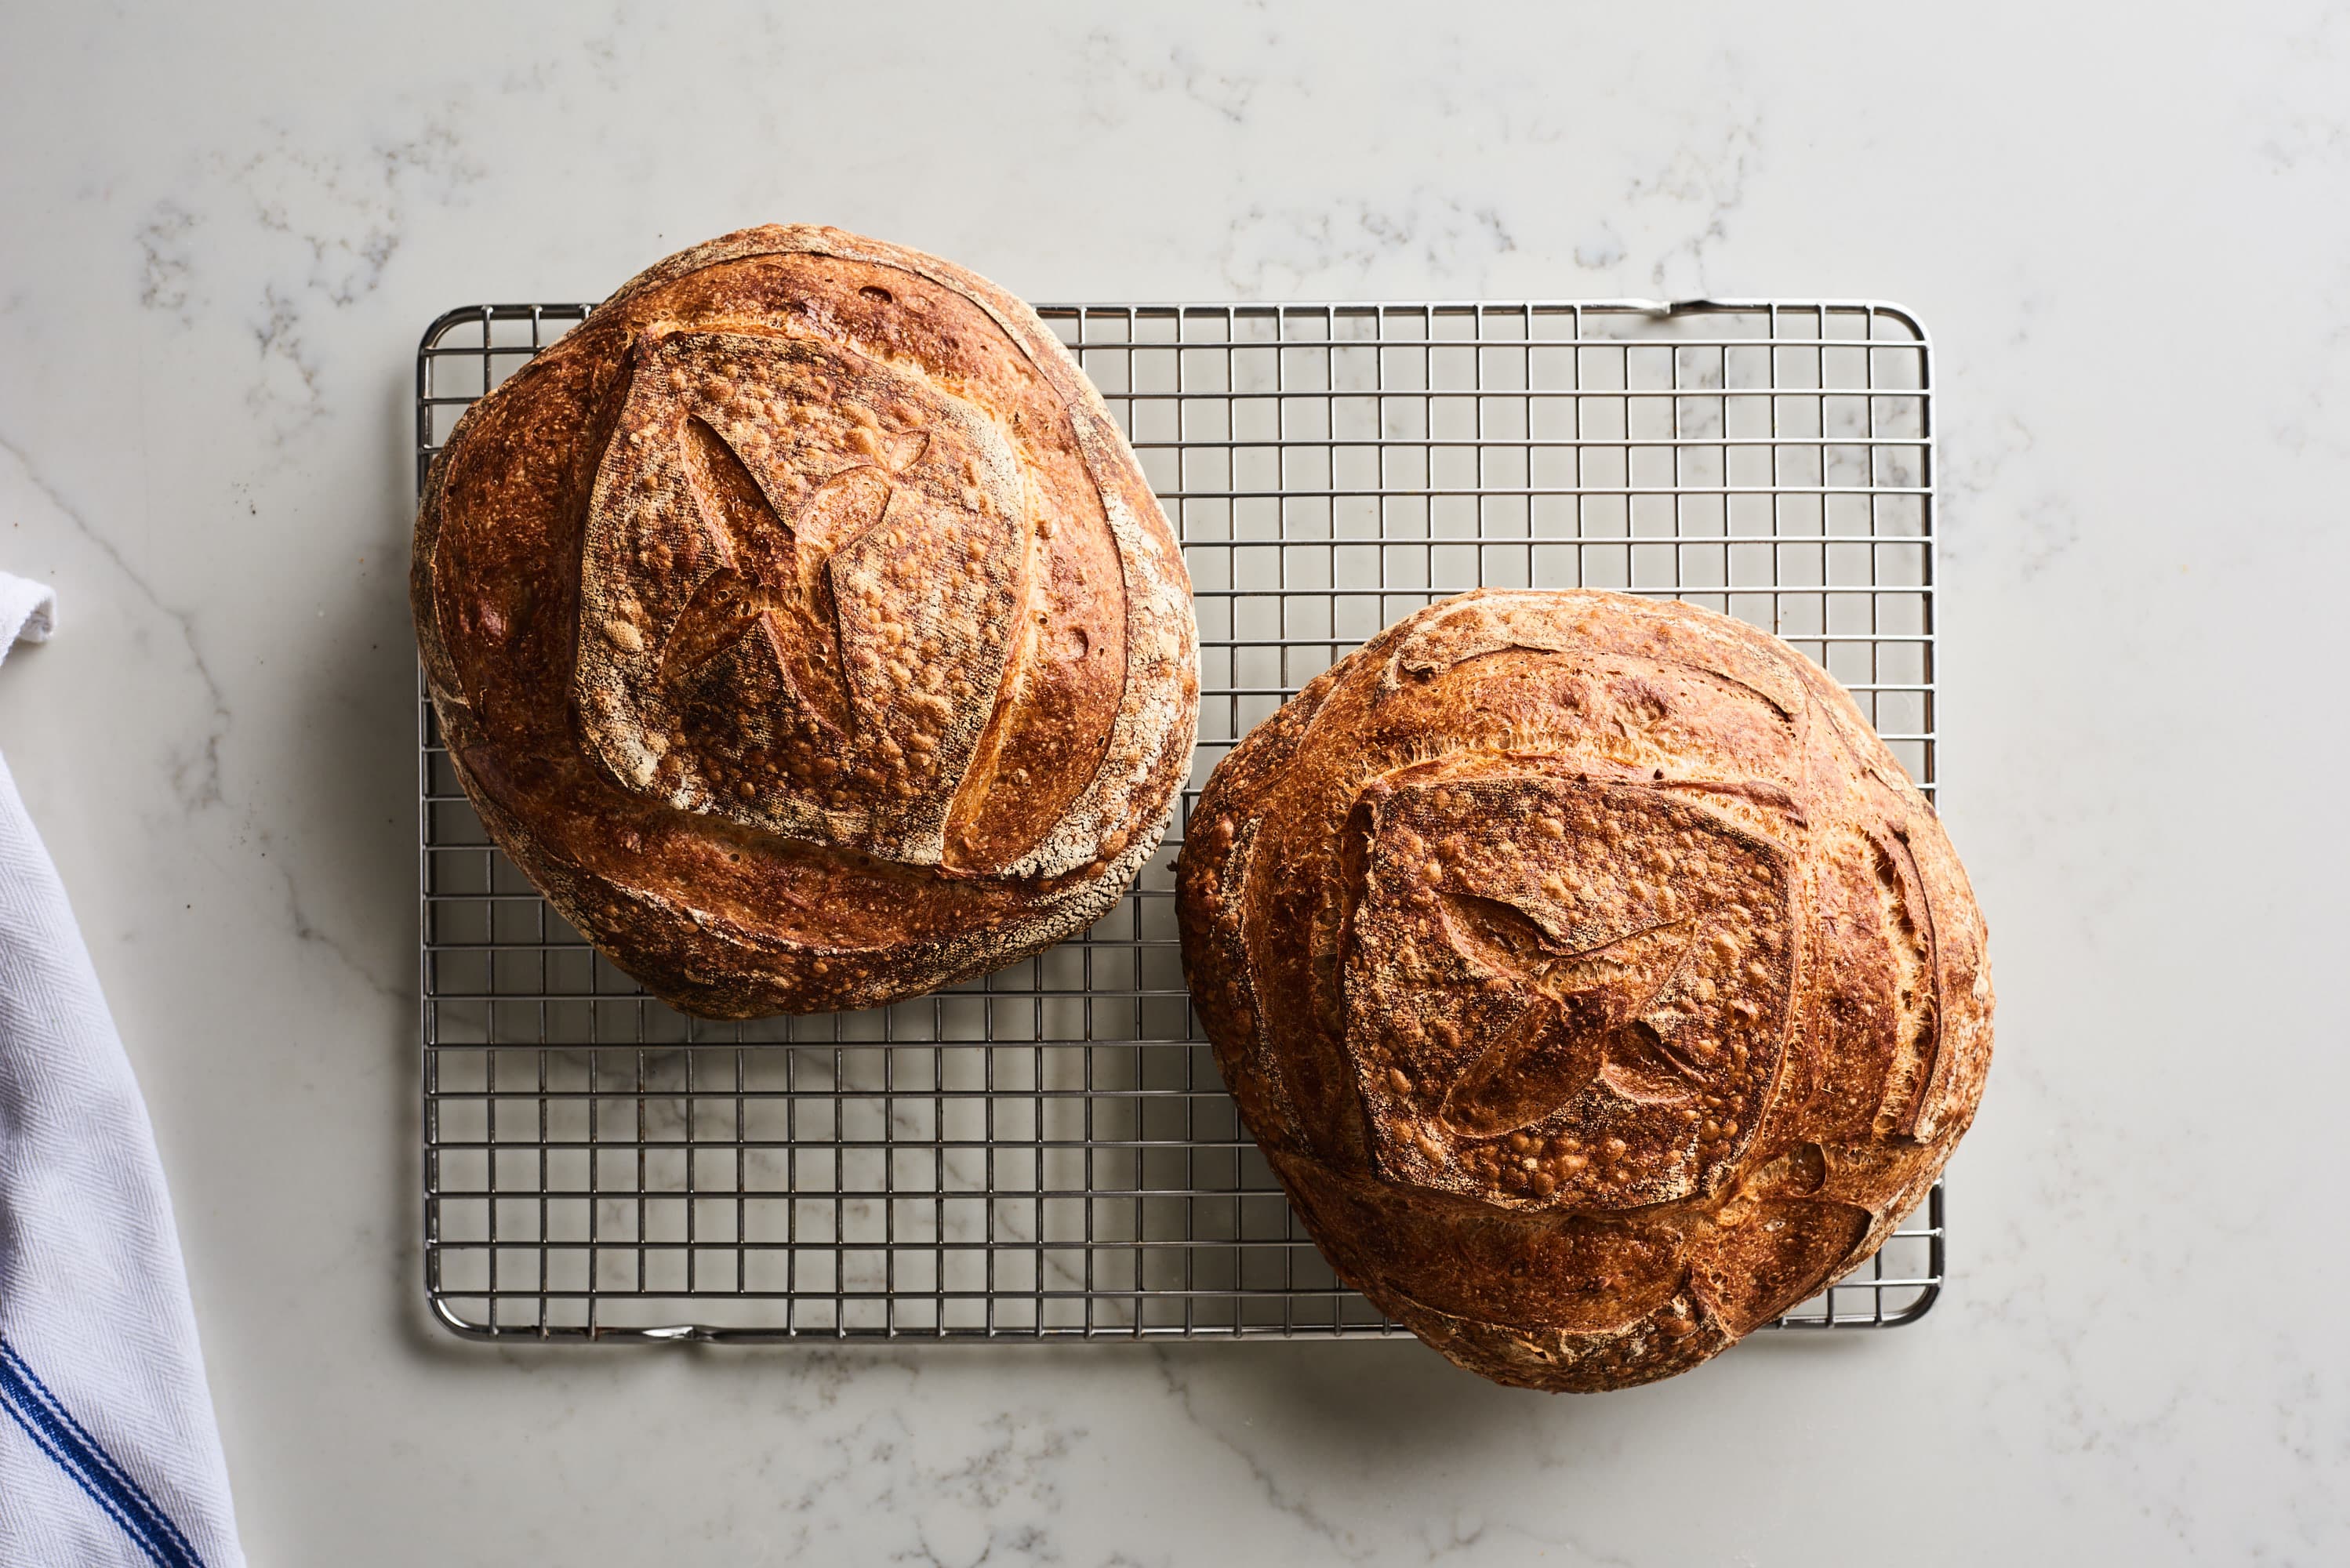 https://cdn.apartmenttherapy.info/image/upload/v1579298797/k/Photo/Recipes/2020-01-How-to-Sourdough-Bread/98668-cooling_How-to-make-sourdough-bread.jpg